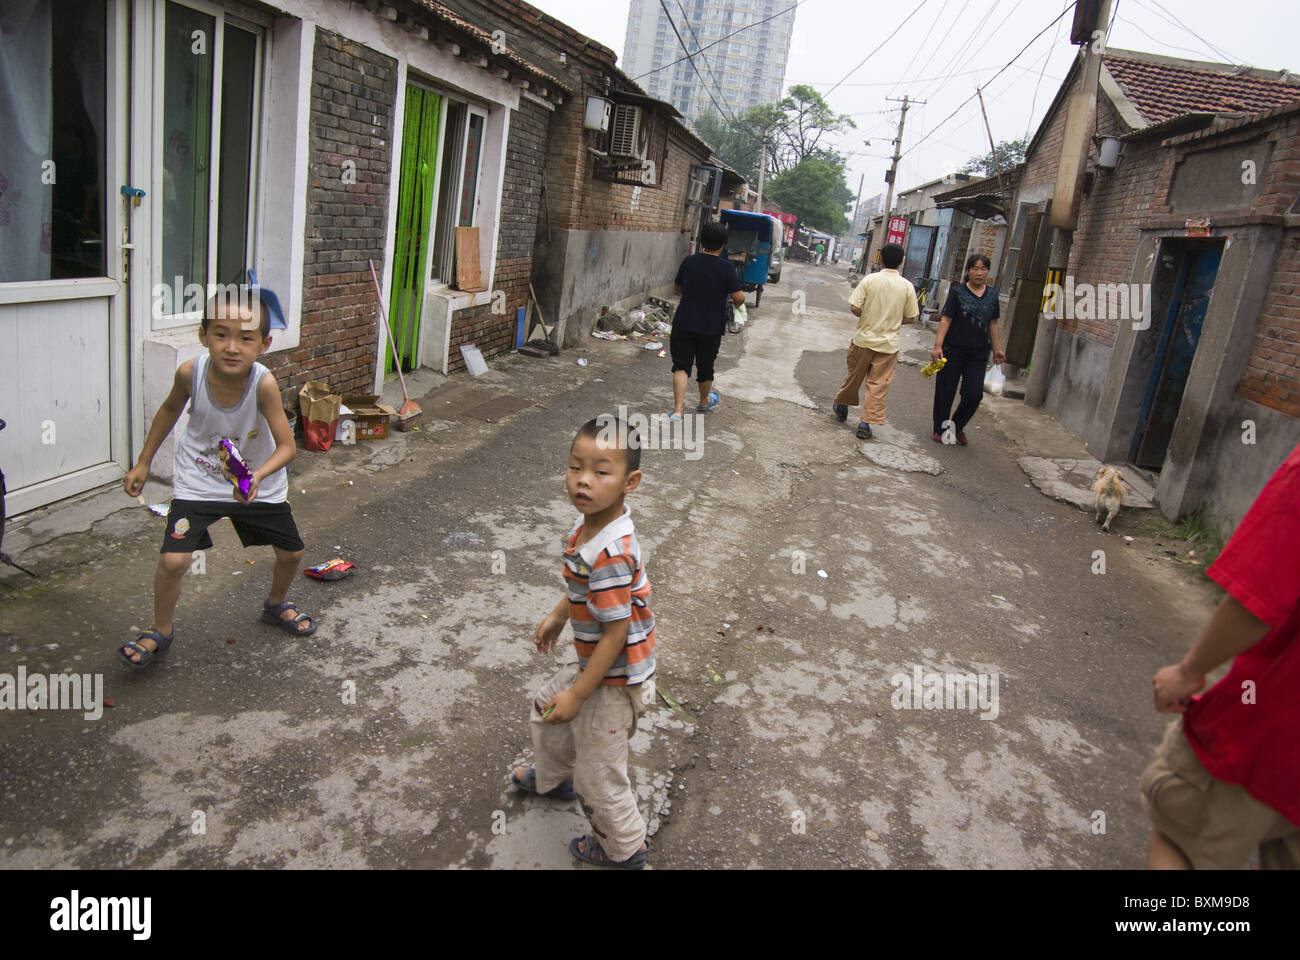 children playing on the street in a poor neighbourhood in beijing,china Stock Photo